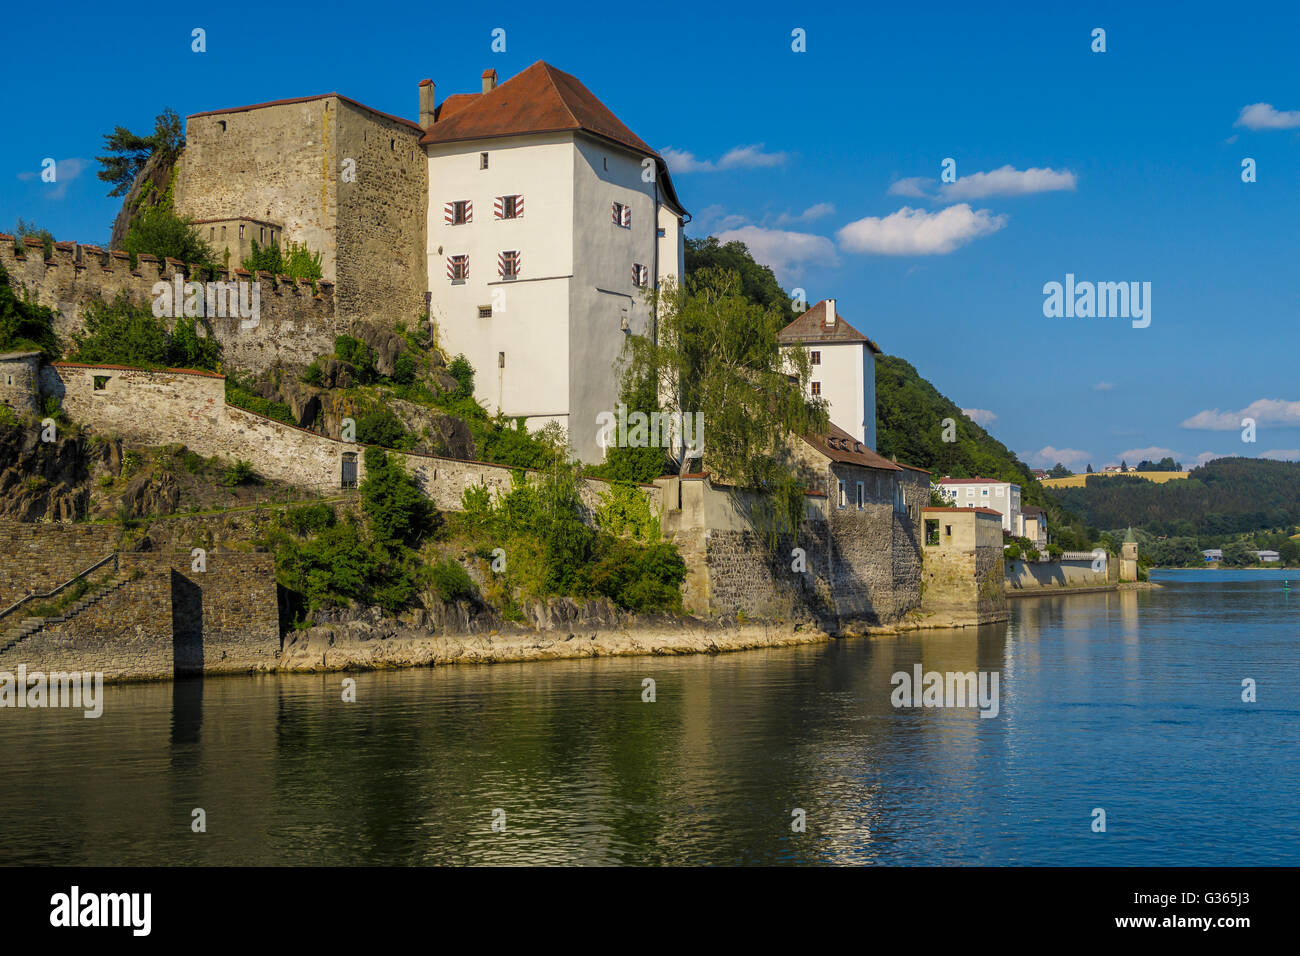 Riverside medieval fortified architecture on the Danube in Passau, Lower Bavaria, Germany. Stock Photo